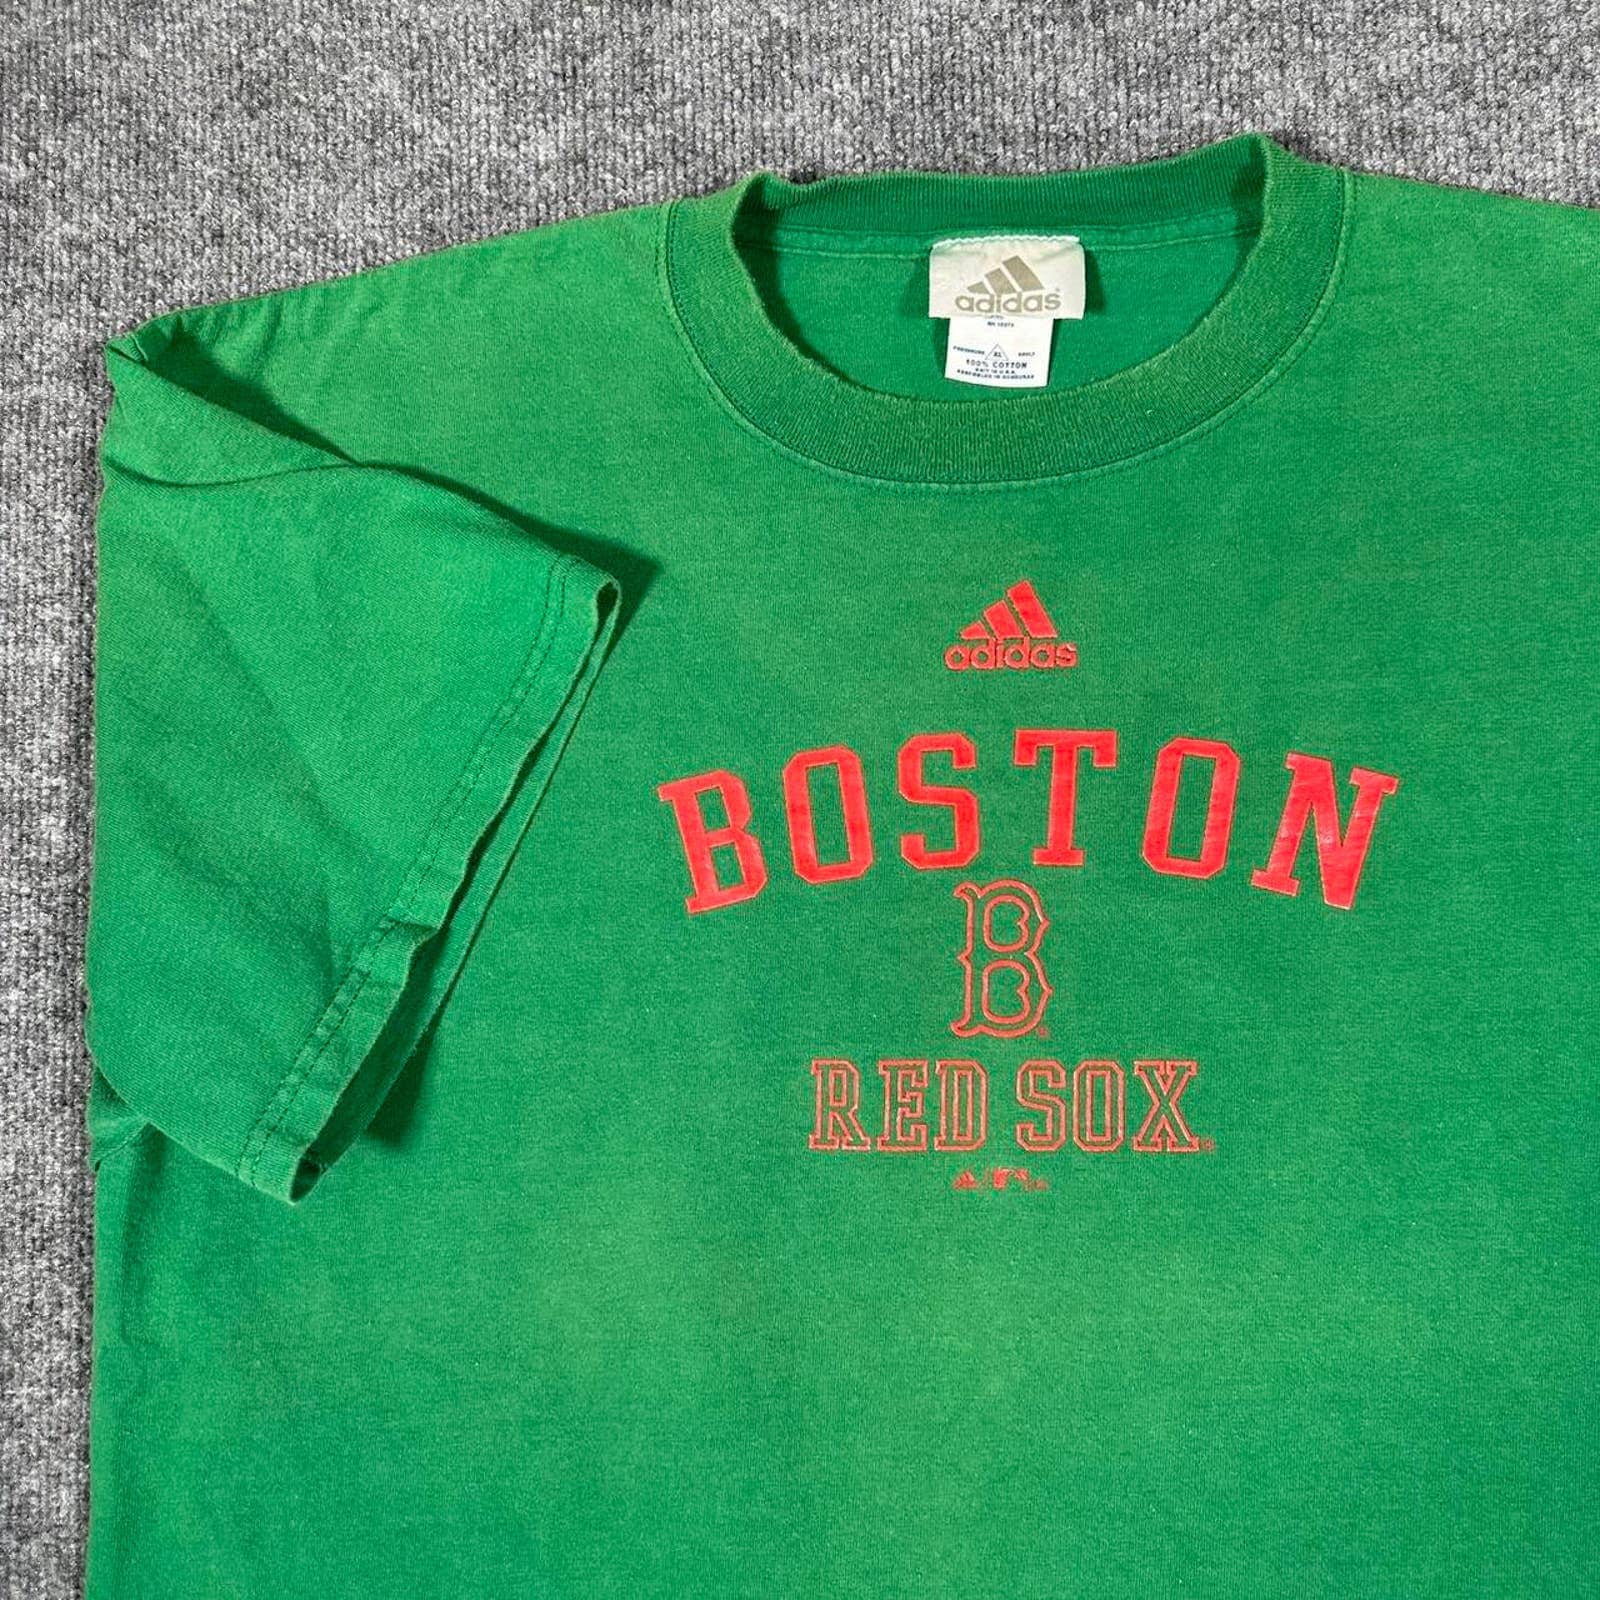 Buy Red Sox Vintage Shirt Online In India -  India